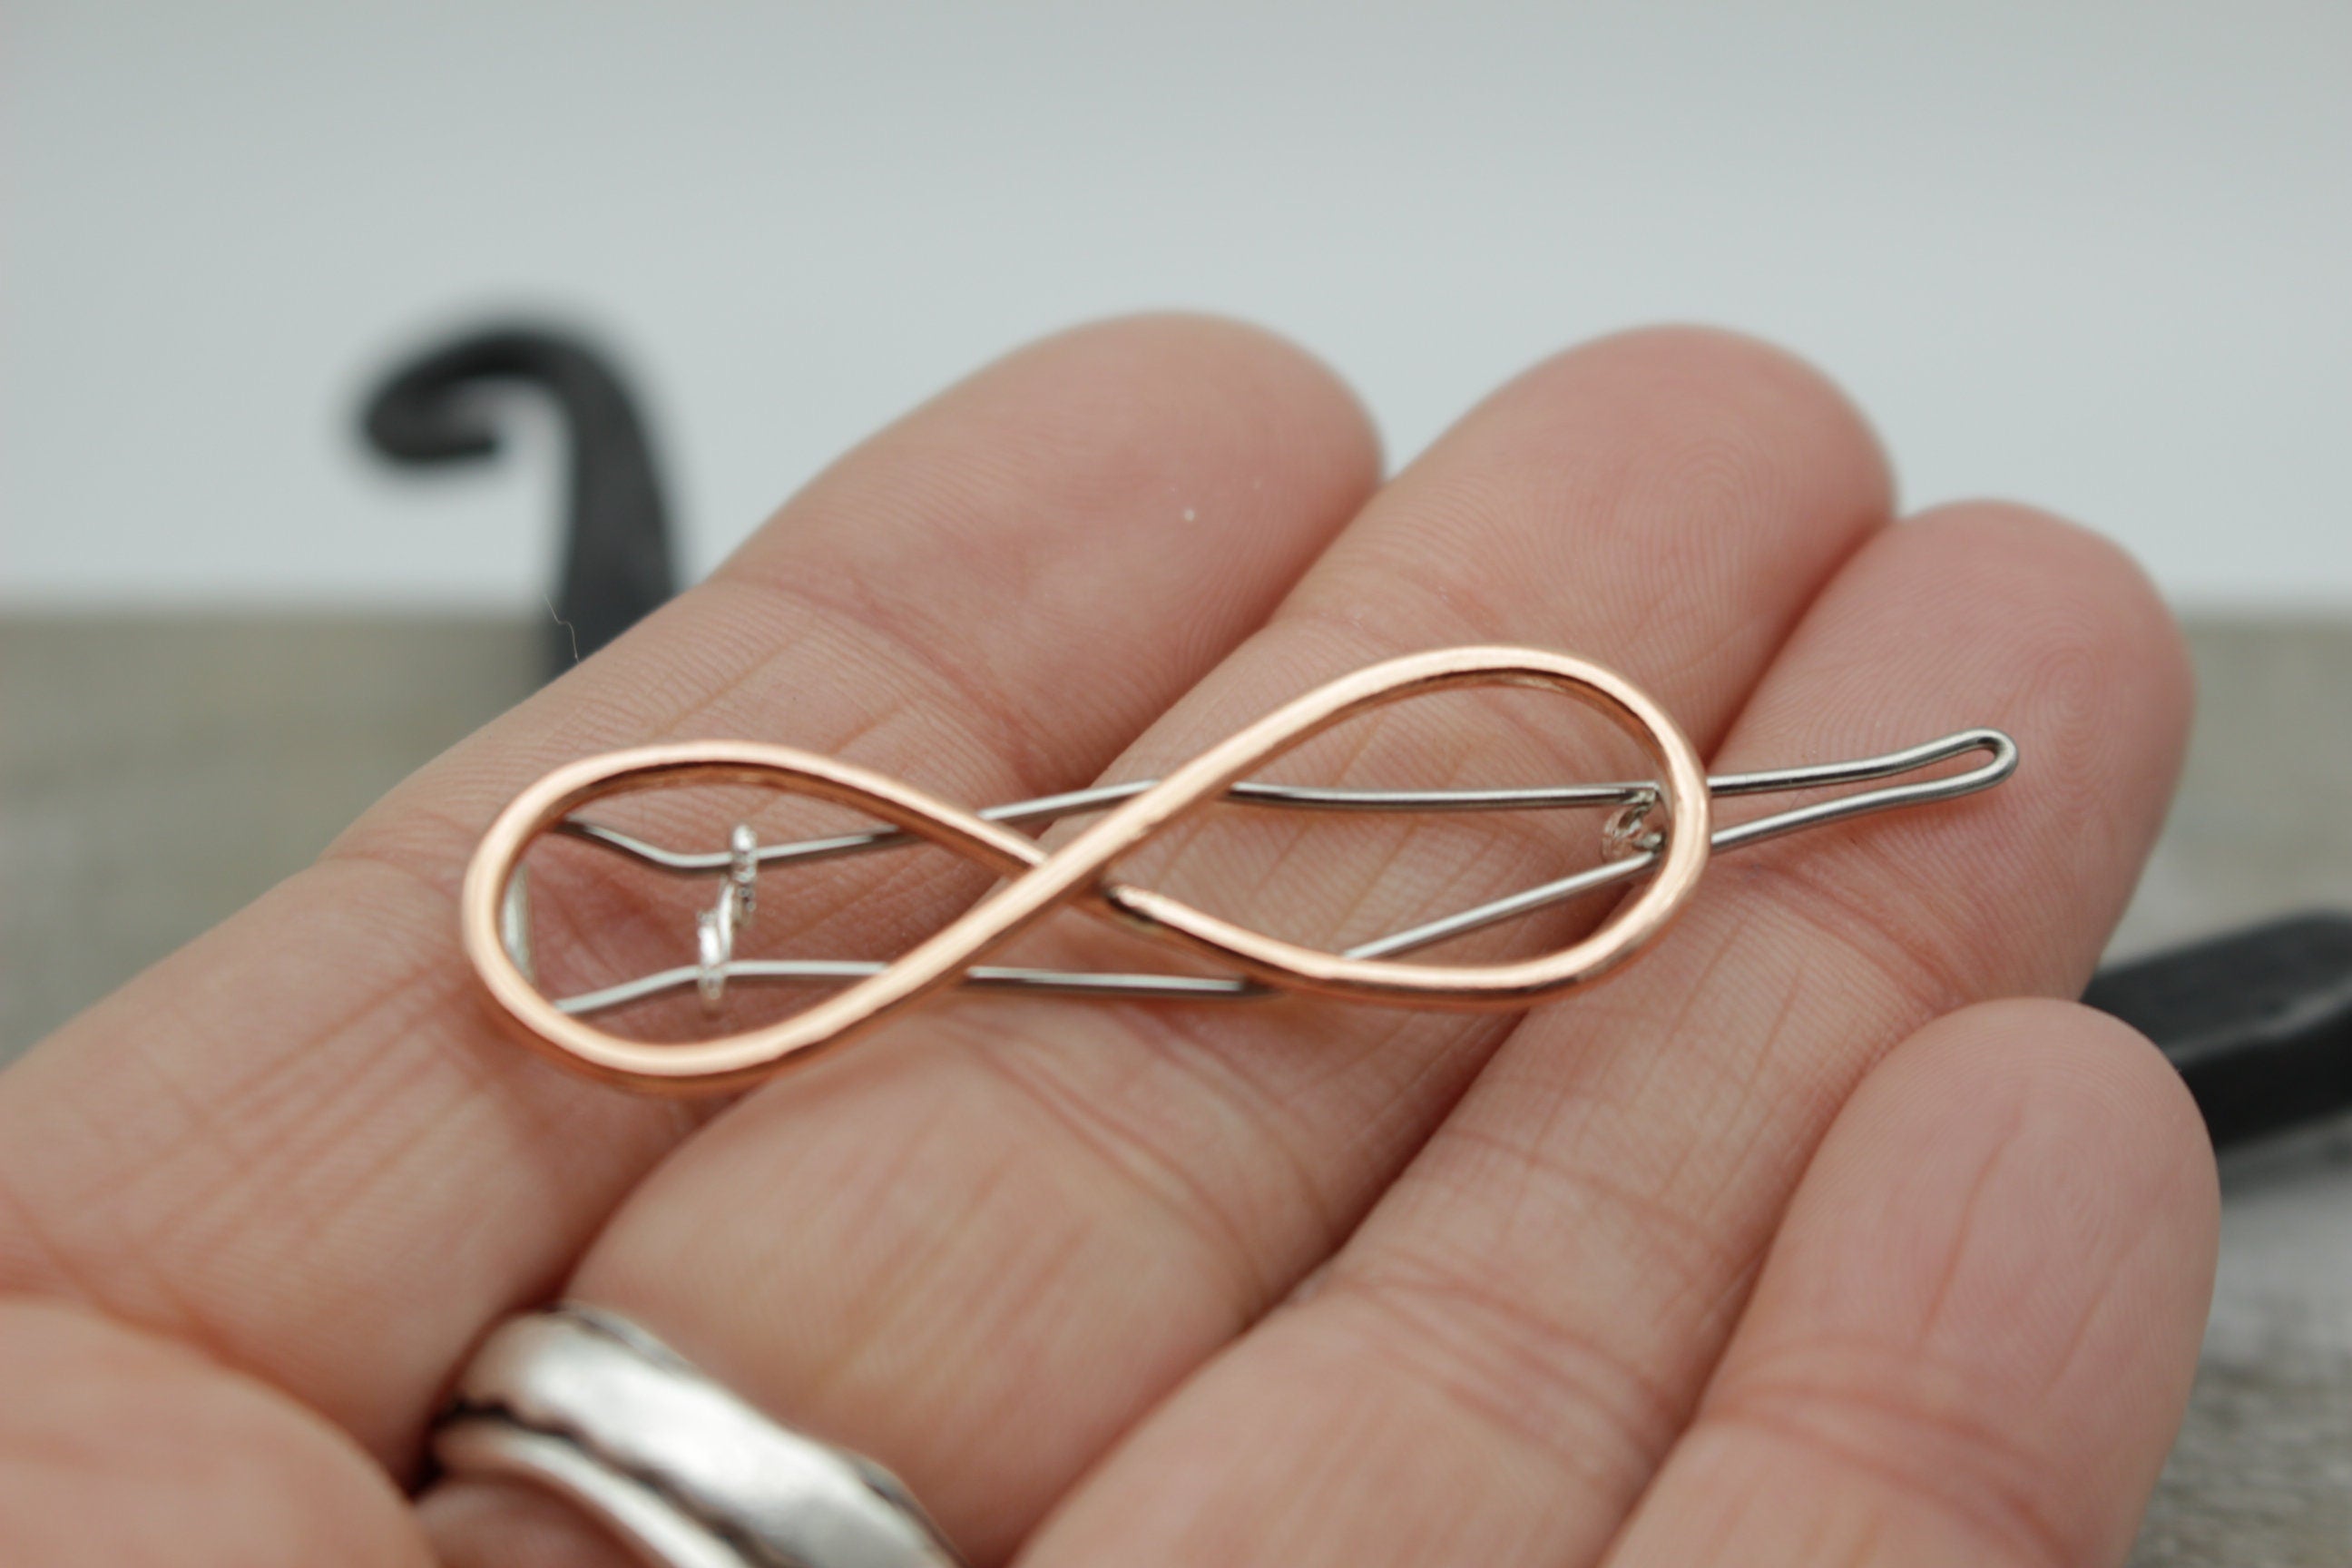 Petite copper barrette - Small infinity barrette - gift for her - small barrette - hair jewelry - bangs